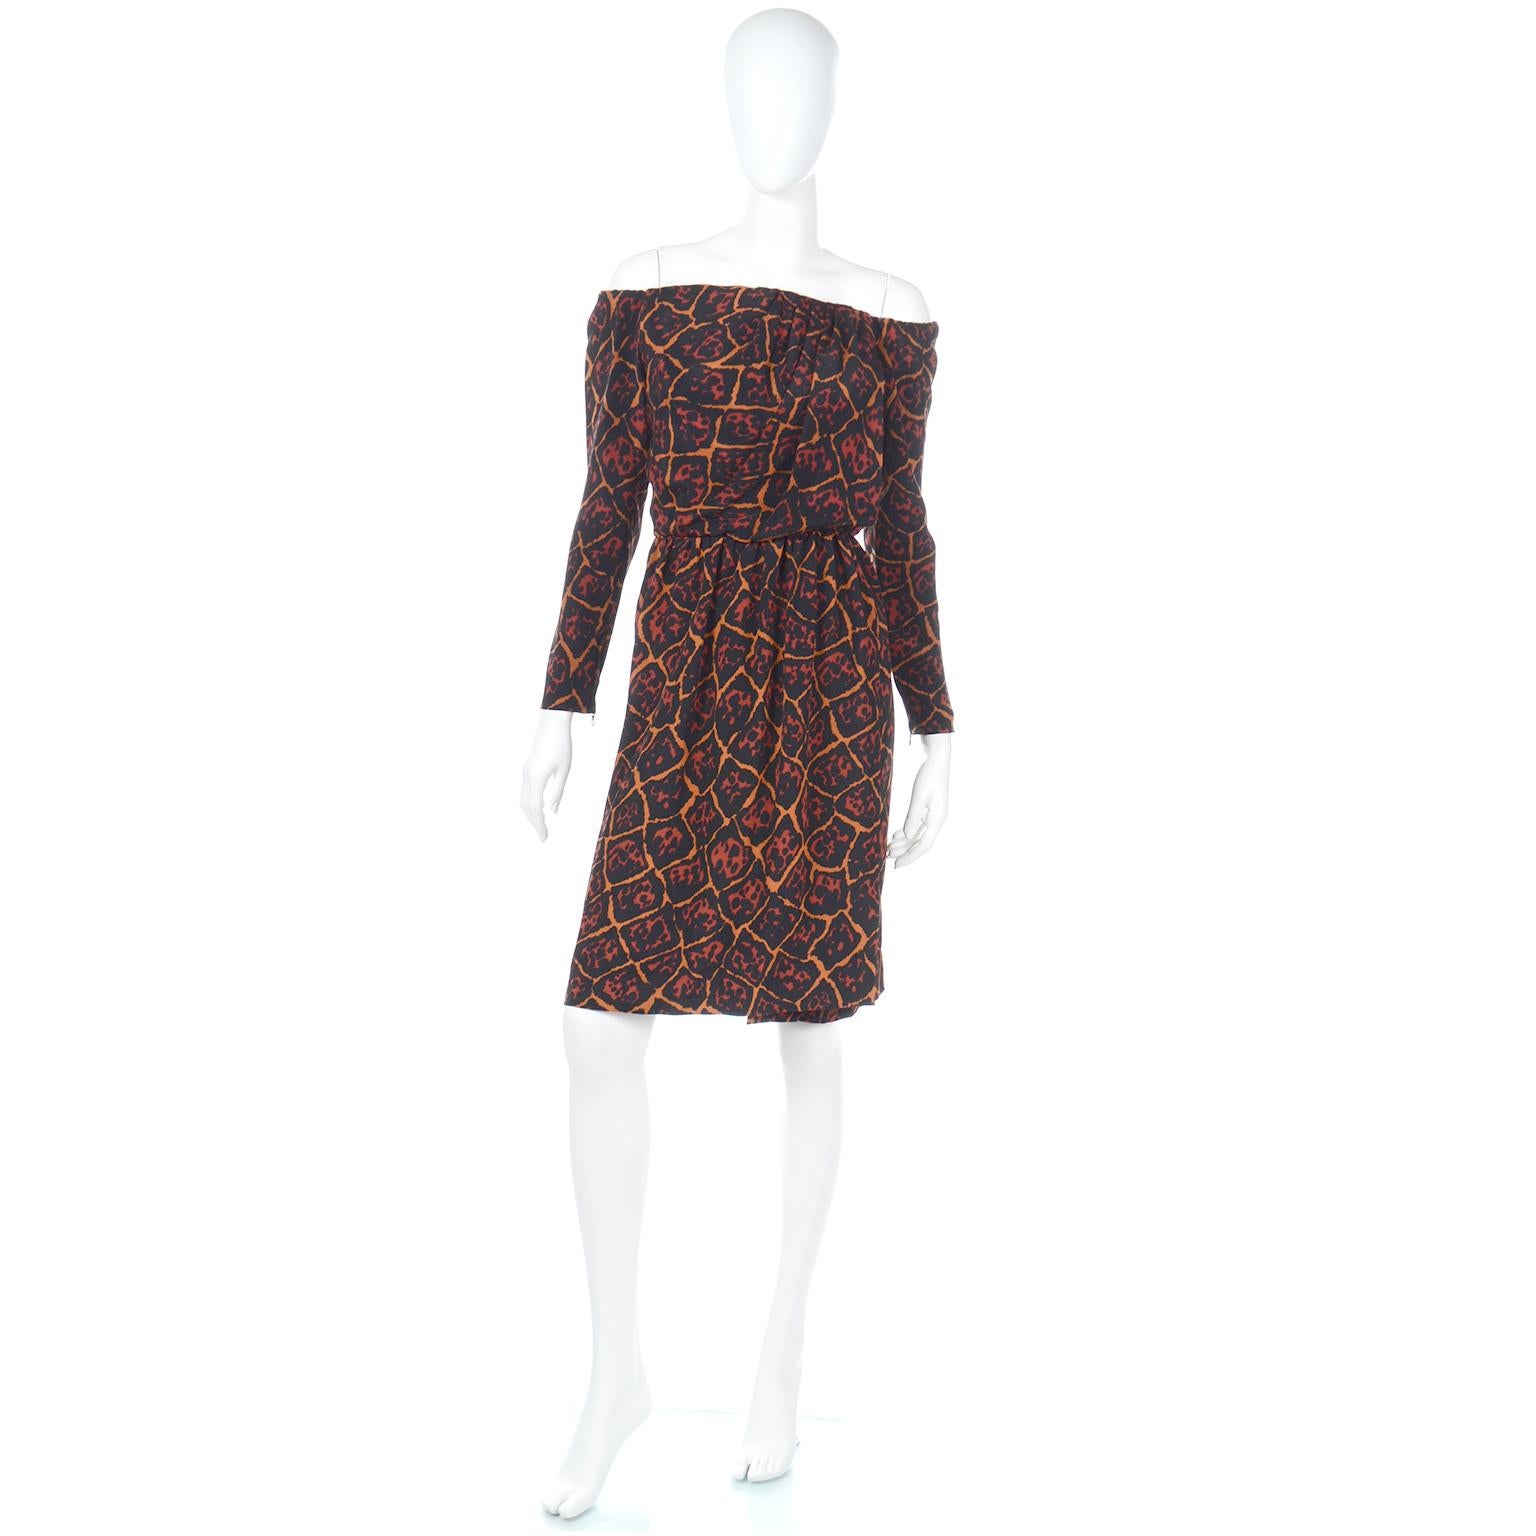 Yves Saint Laurent 1989 Brown & Orange Animal Print Runway Dress Documented  In Excellent Condition For Sale In Portland, OR